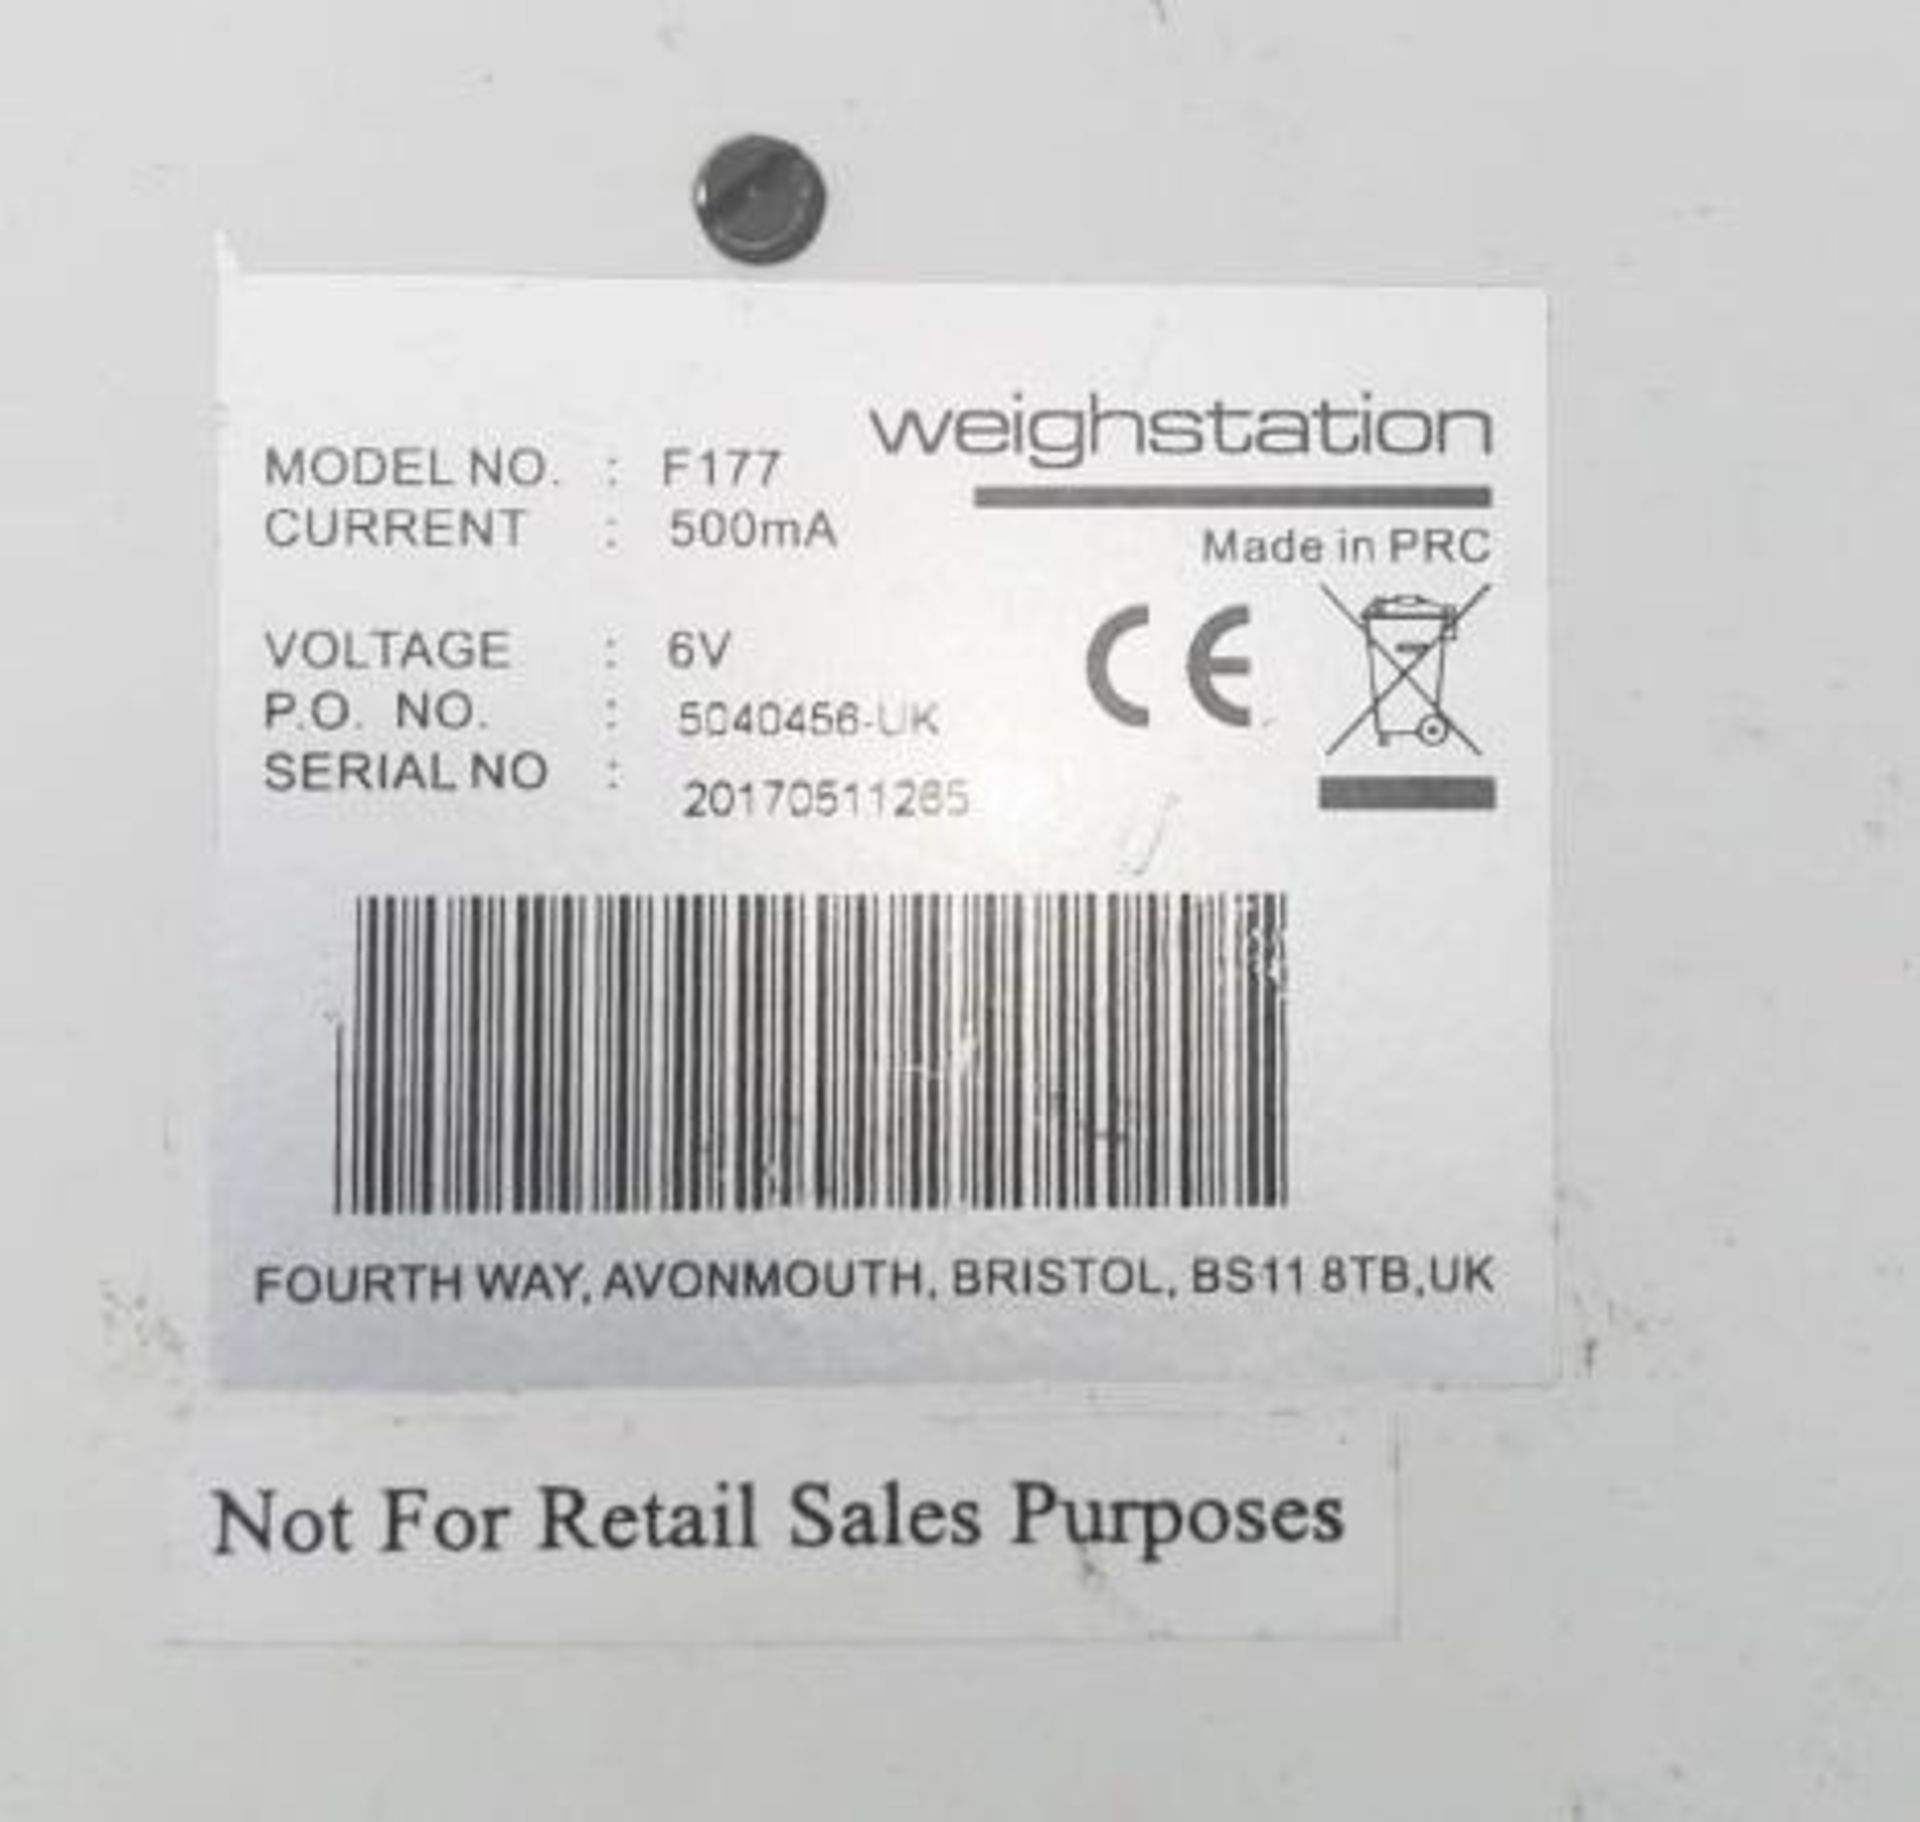 1 x Weighstation Electronic Platform Scale 3kg (Model F177) - Pre-owned, Taken From An Asian Fusion - Image 2 of 3